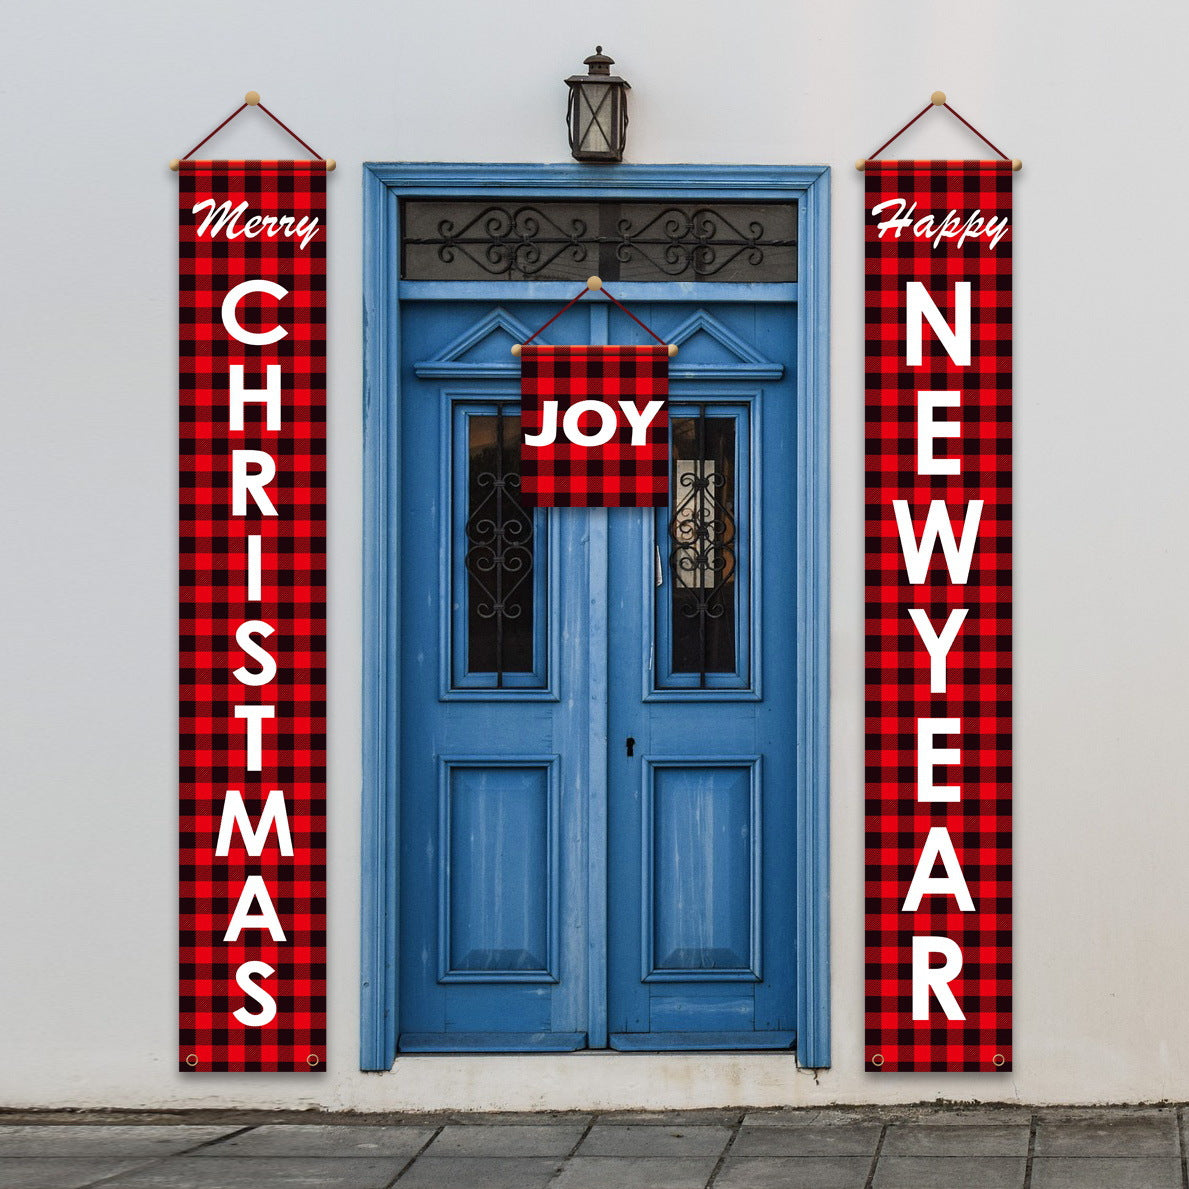 Christmas Decorations - Merry Christmas Banners Hanging